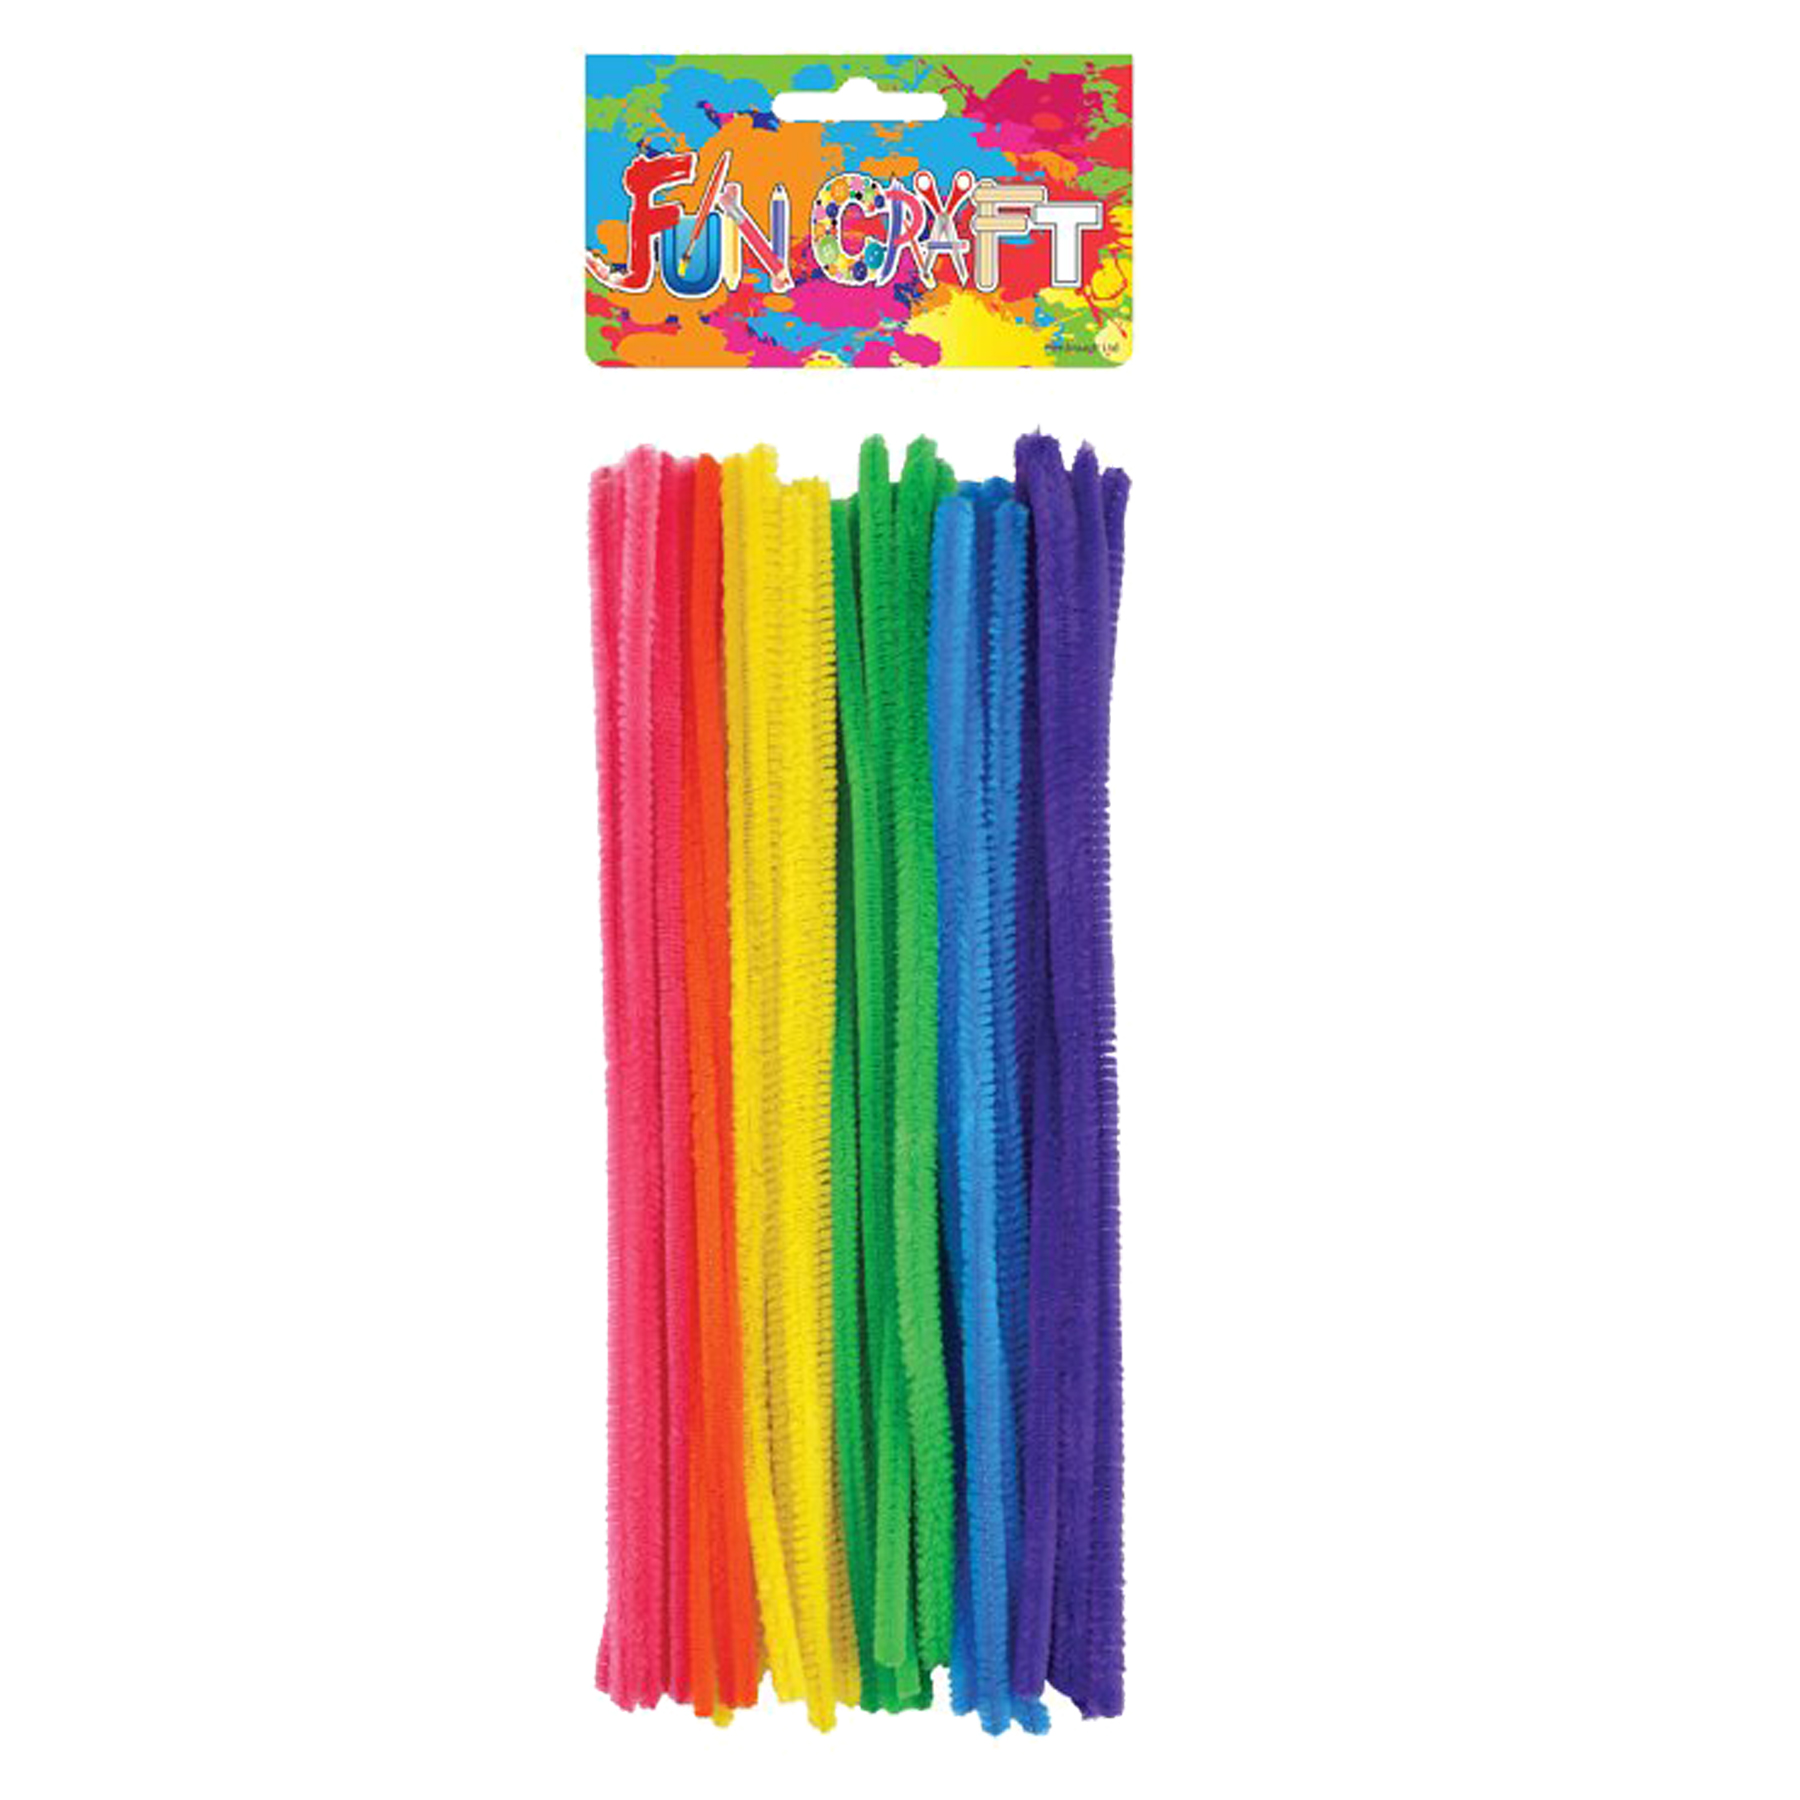 Easter Arts and Crafts Children Activities - Assorted Chenille Stems / Pipe Cleaners 30pk